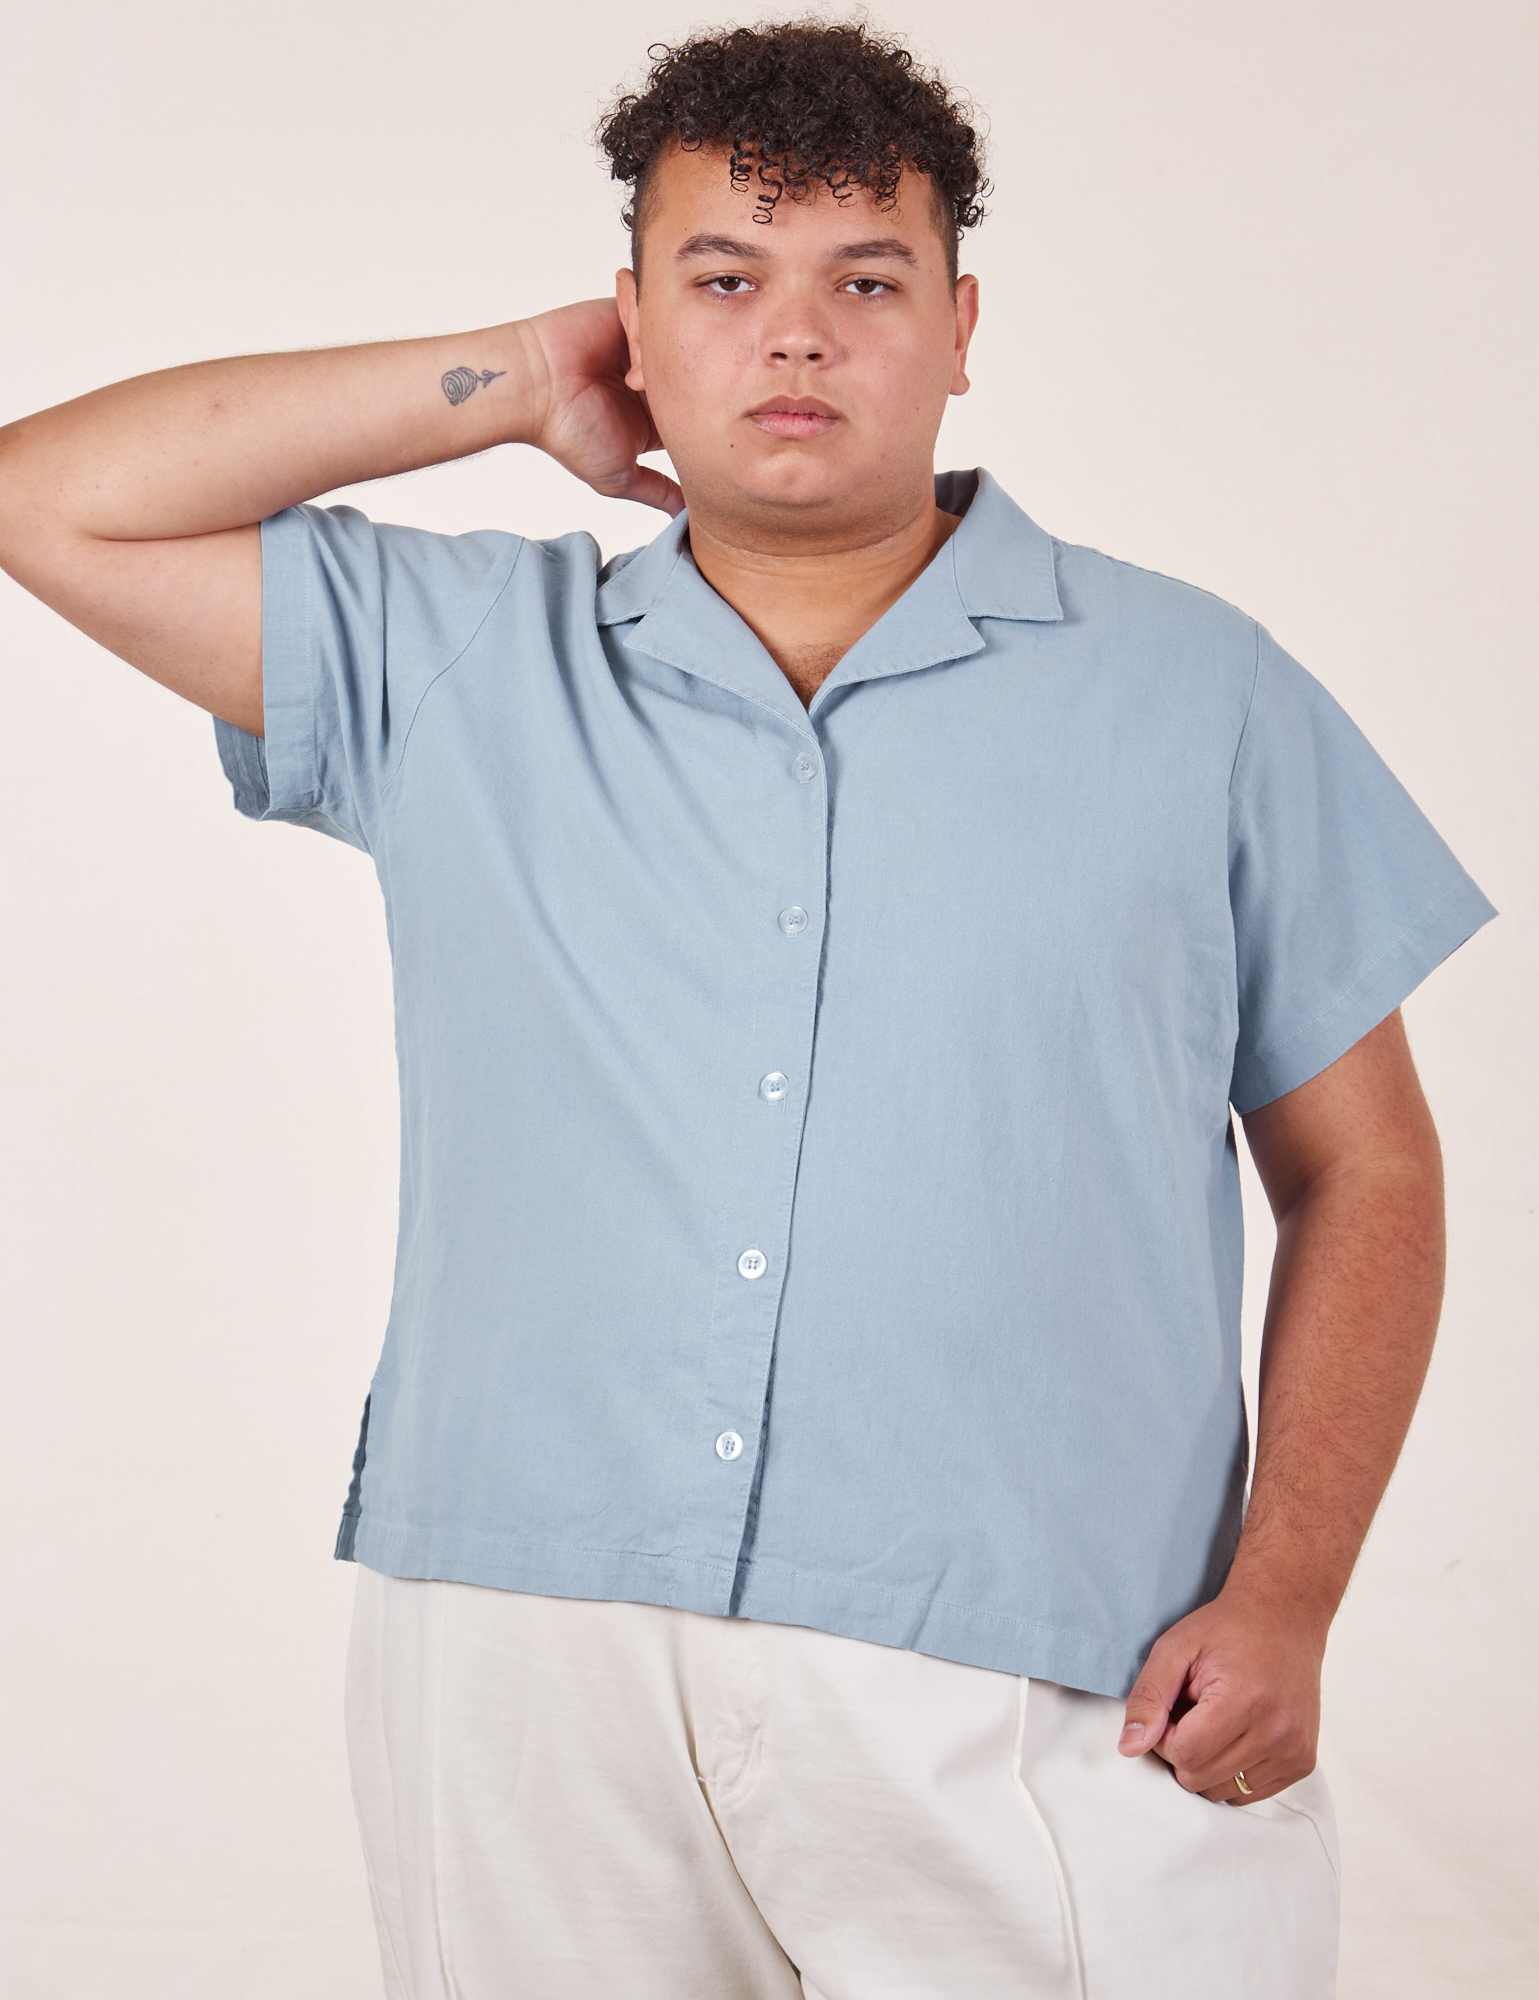 Miguel is wearing Pantry Button-Up in Periwinkle